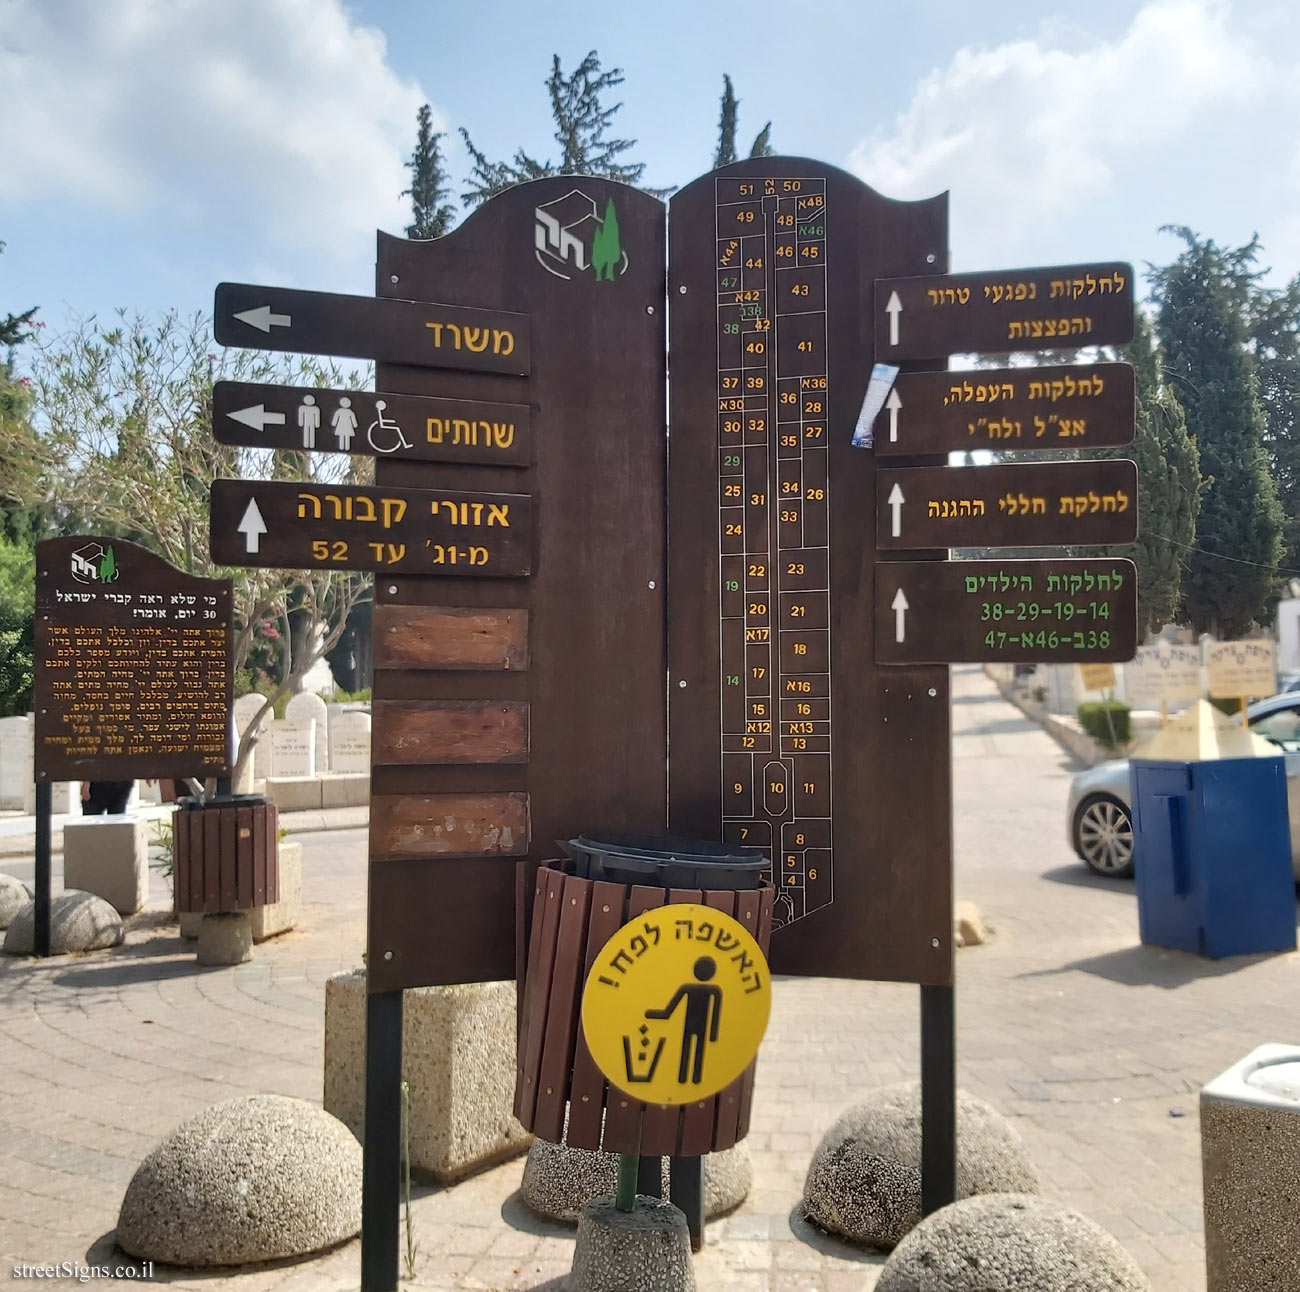 Nahalat Yitzhak Cemetery - direction sign and map